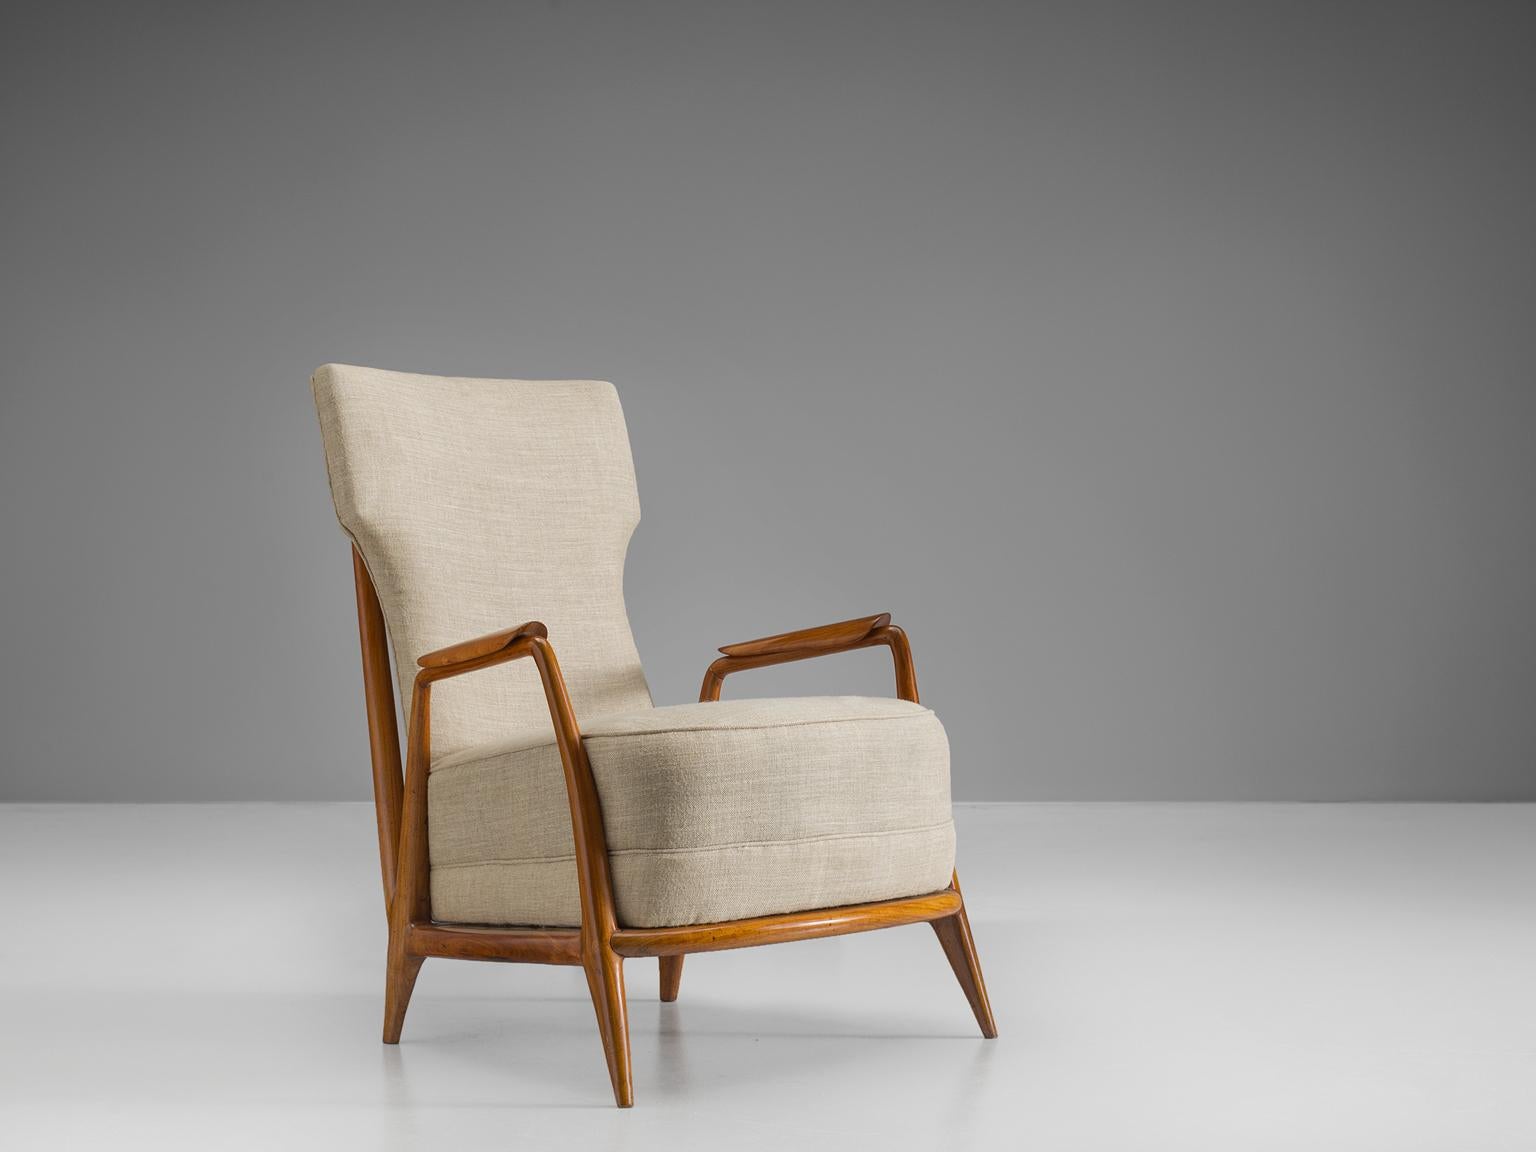 Giuseppi Scapinelli, lounge chair, caviuna wood and fabric, 1950s, Brazil.

Elegant easy chairs with spoke back. This chair in caviuna rosewood exposes the beautiful grain of the wood in an eloquent manner. This chair is one of Scapinelli's his most